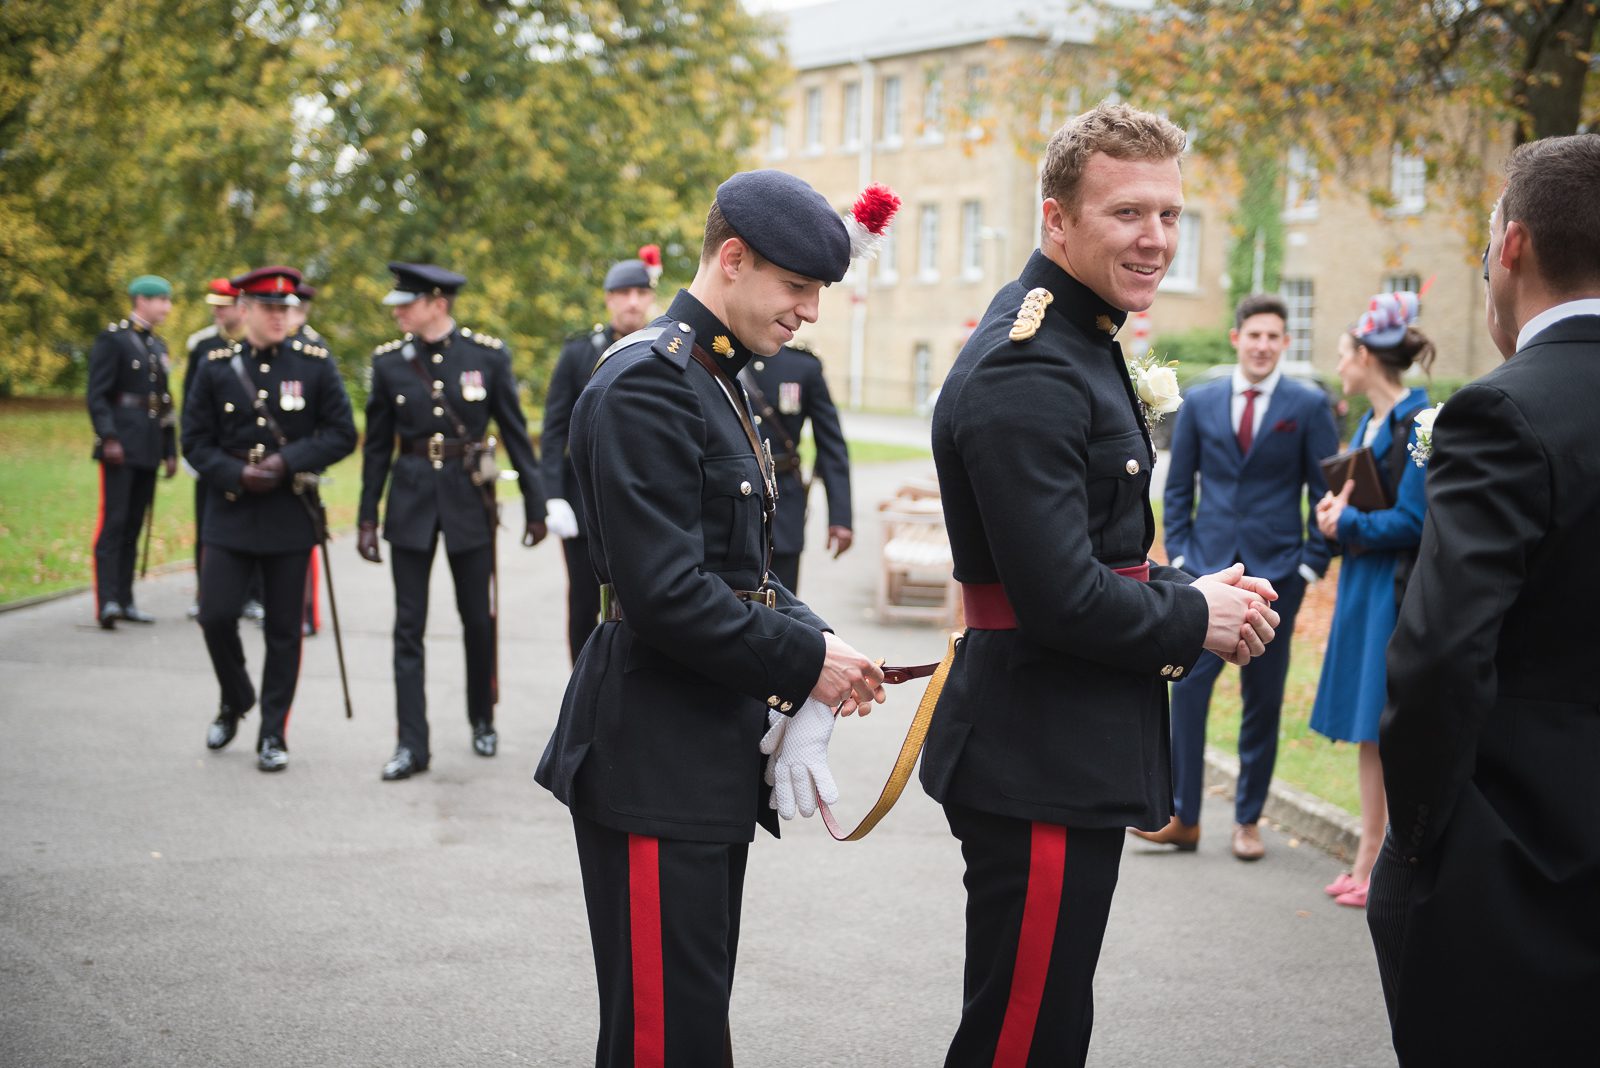 The groom wearing his Captain's uniform prepares for his church ceremony at RMAS.